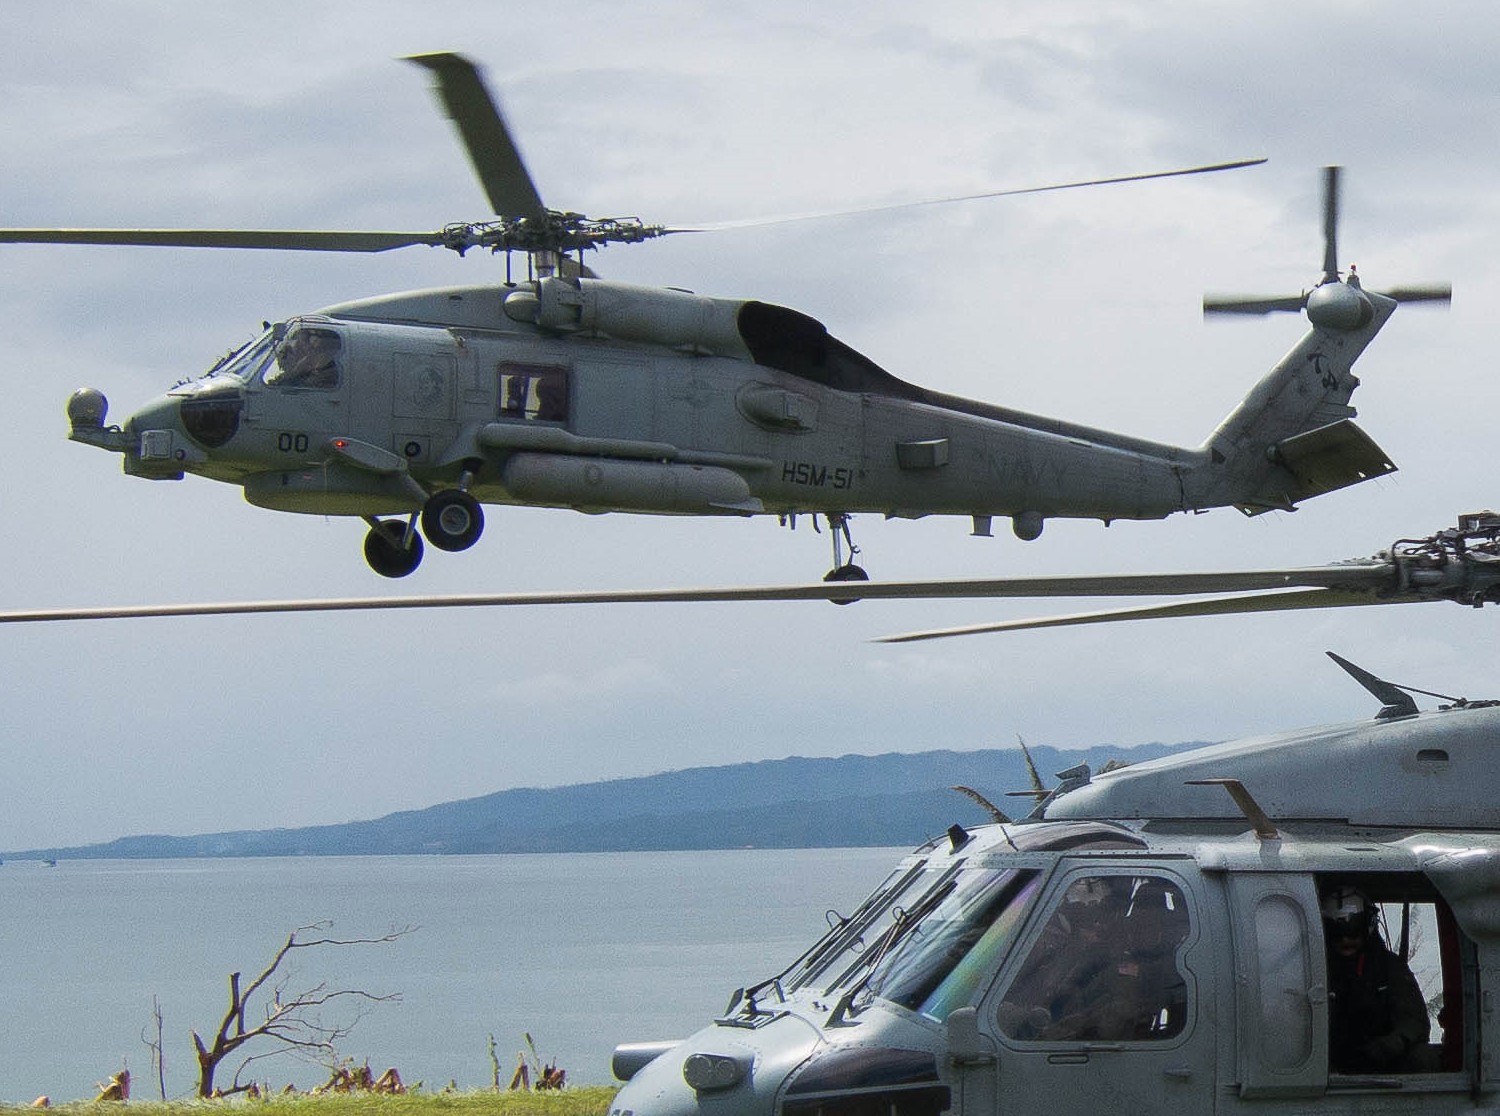 hsm-51 warlords helicopter maritime strike squadron mh-60r seahawk navy 2013 30 ormoc bay philippines taifun haiyan